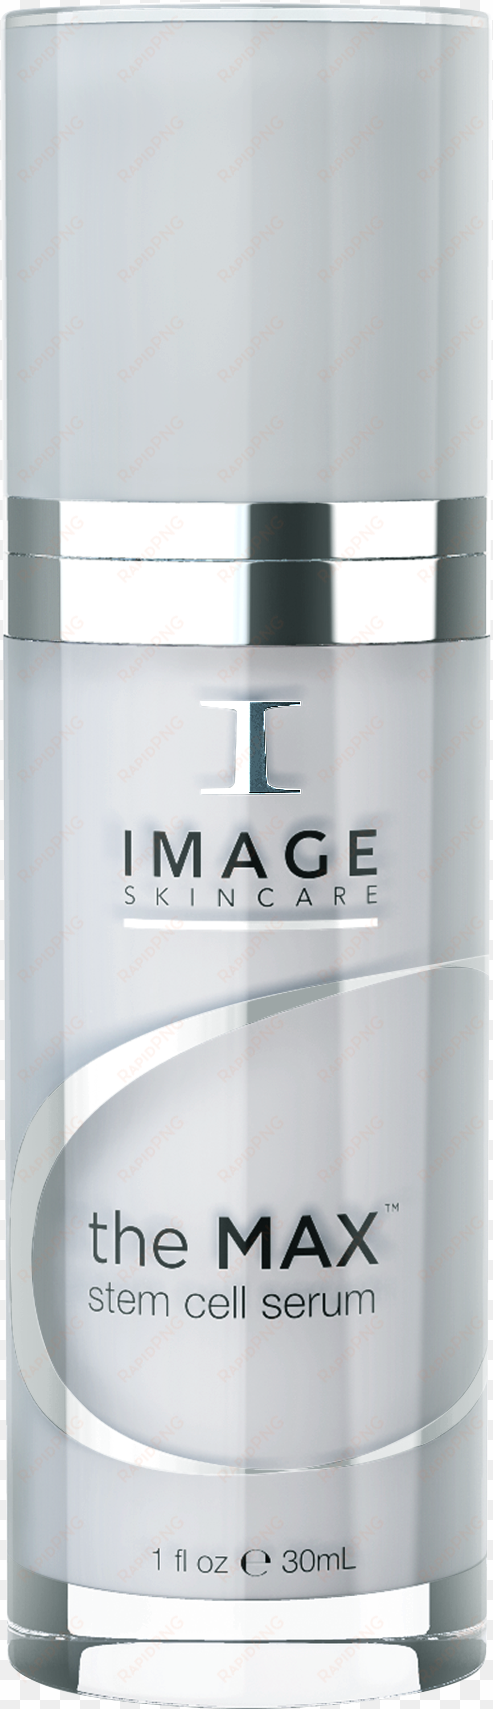 reduce fine lines and wrinkles dramatically - skincare the max stem cell serum